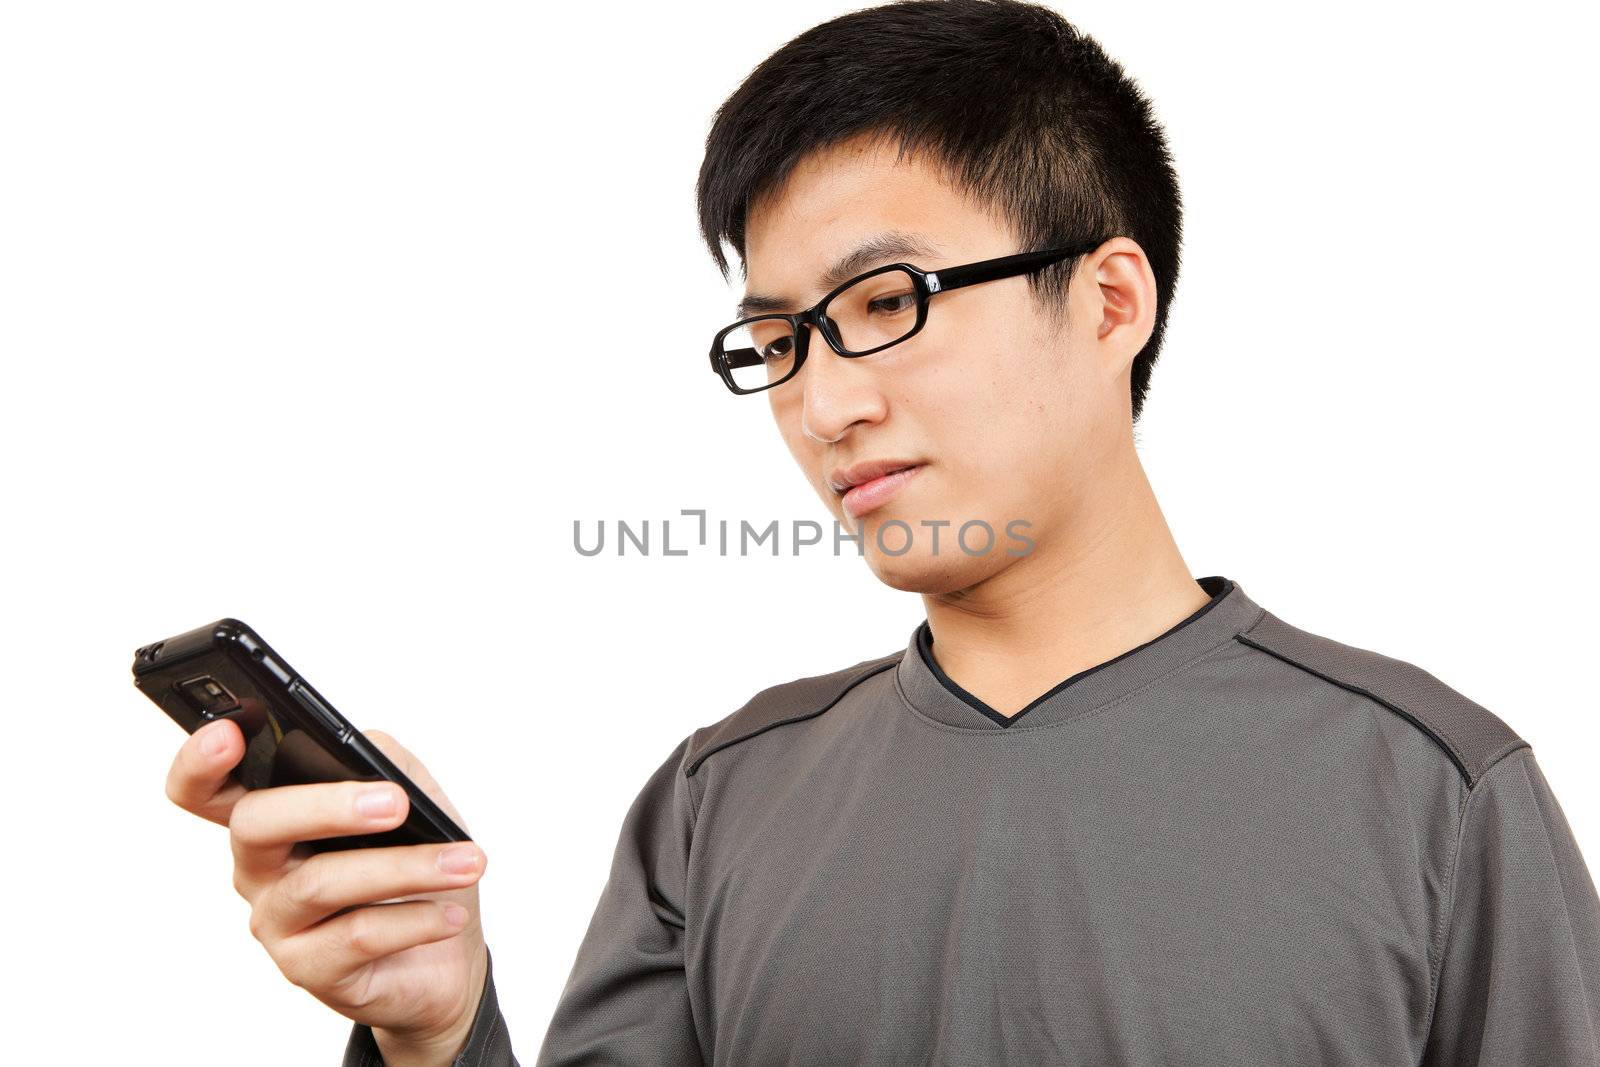 man read SMS on cellphone